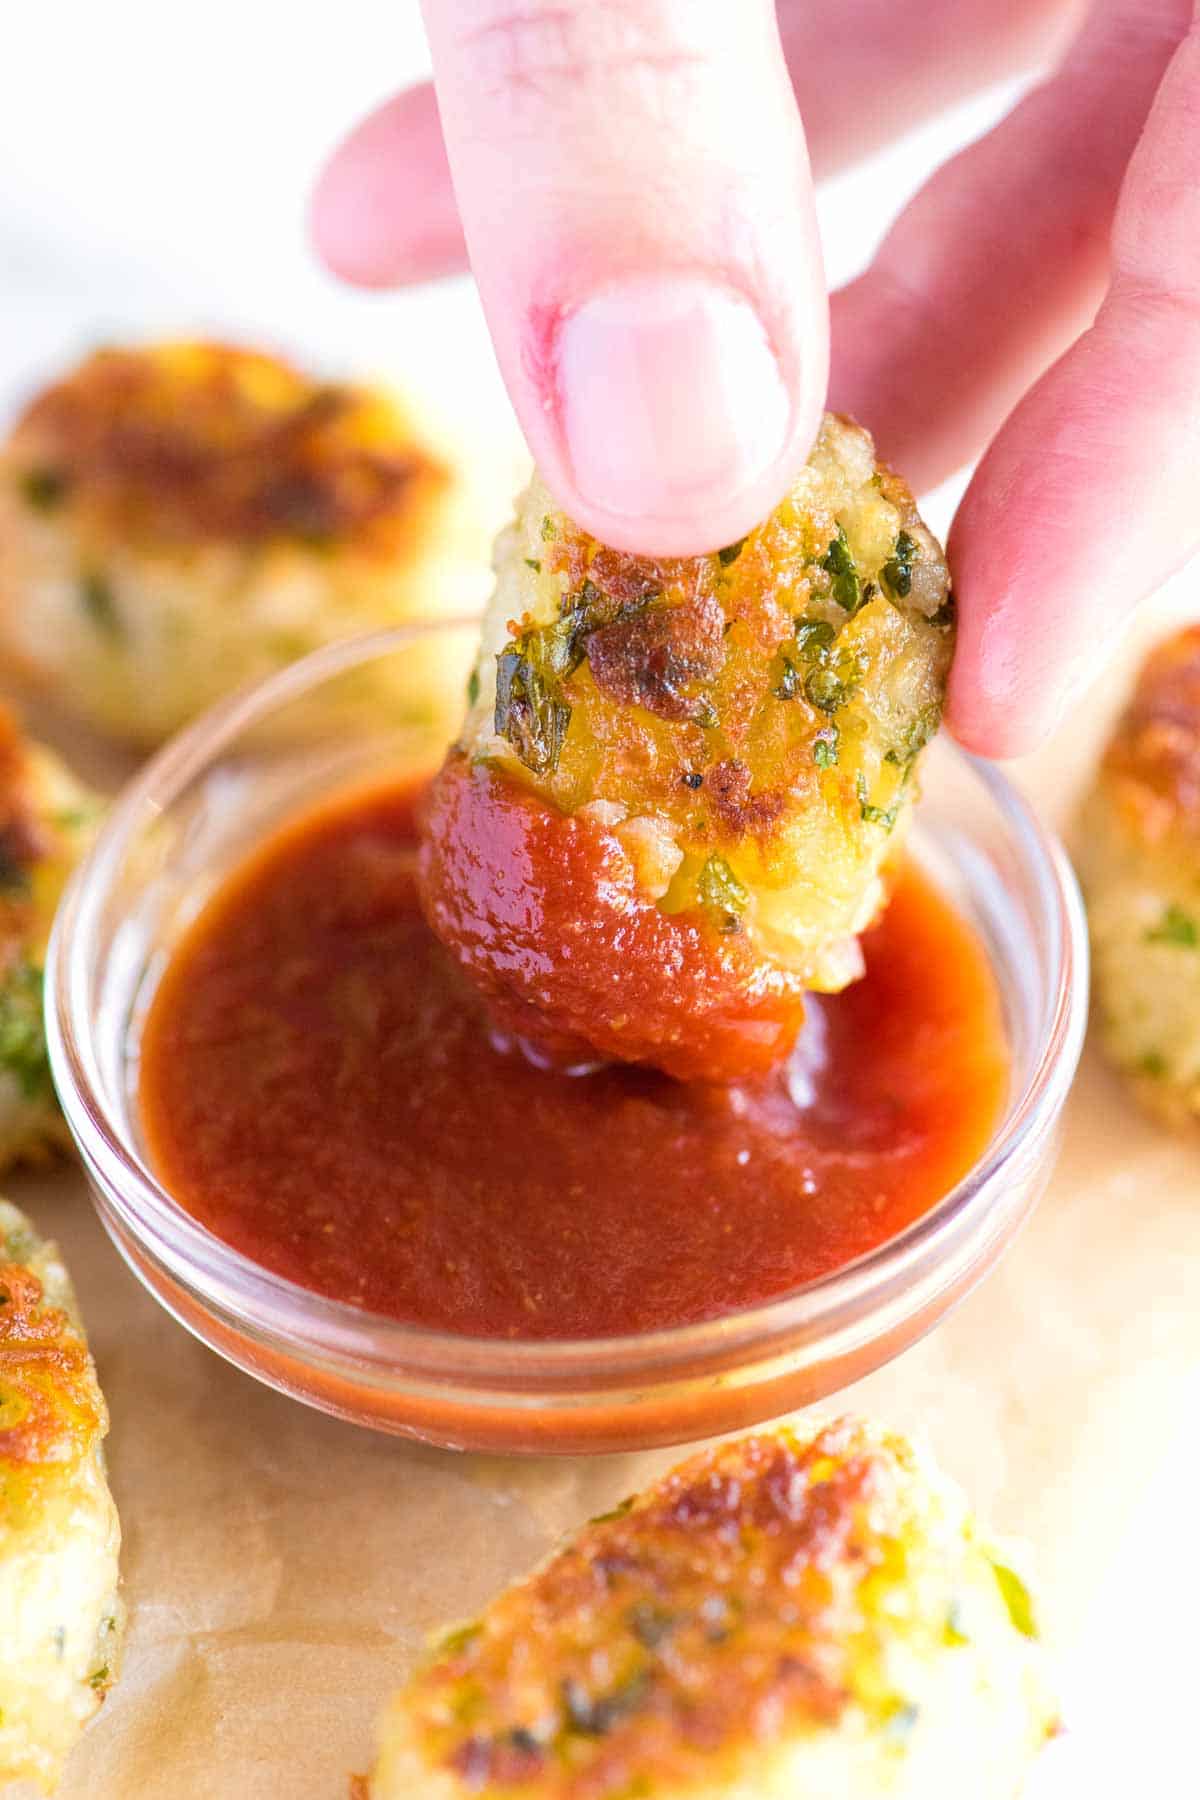 Delicious Oven-Baked Tater Tots